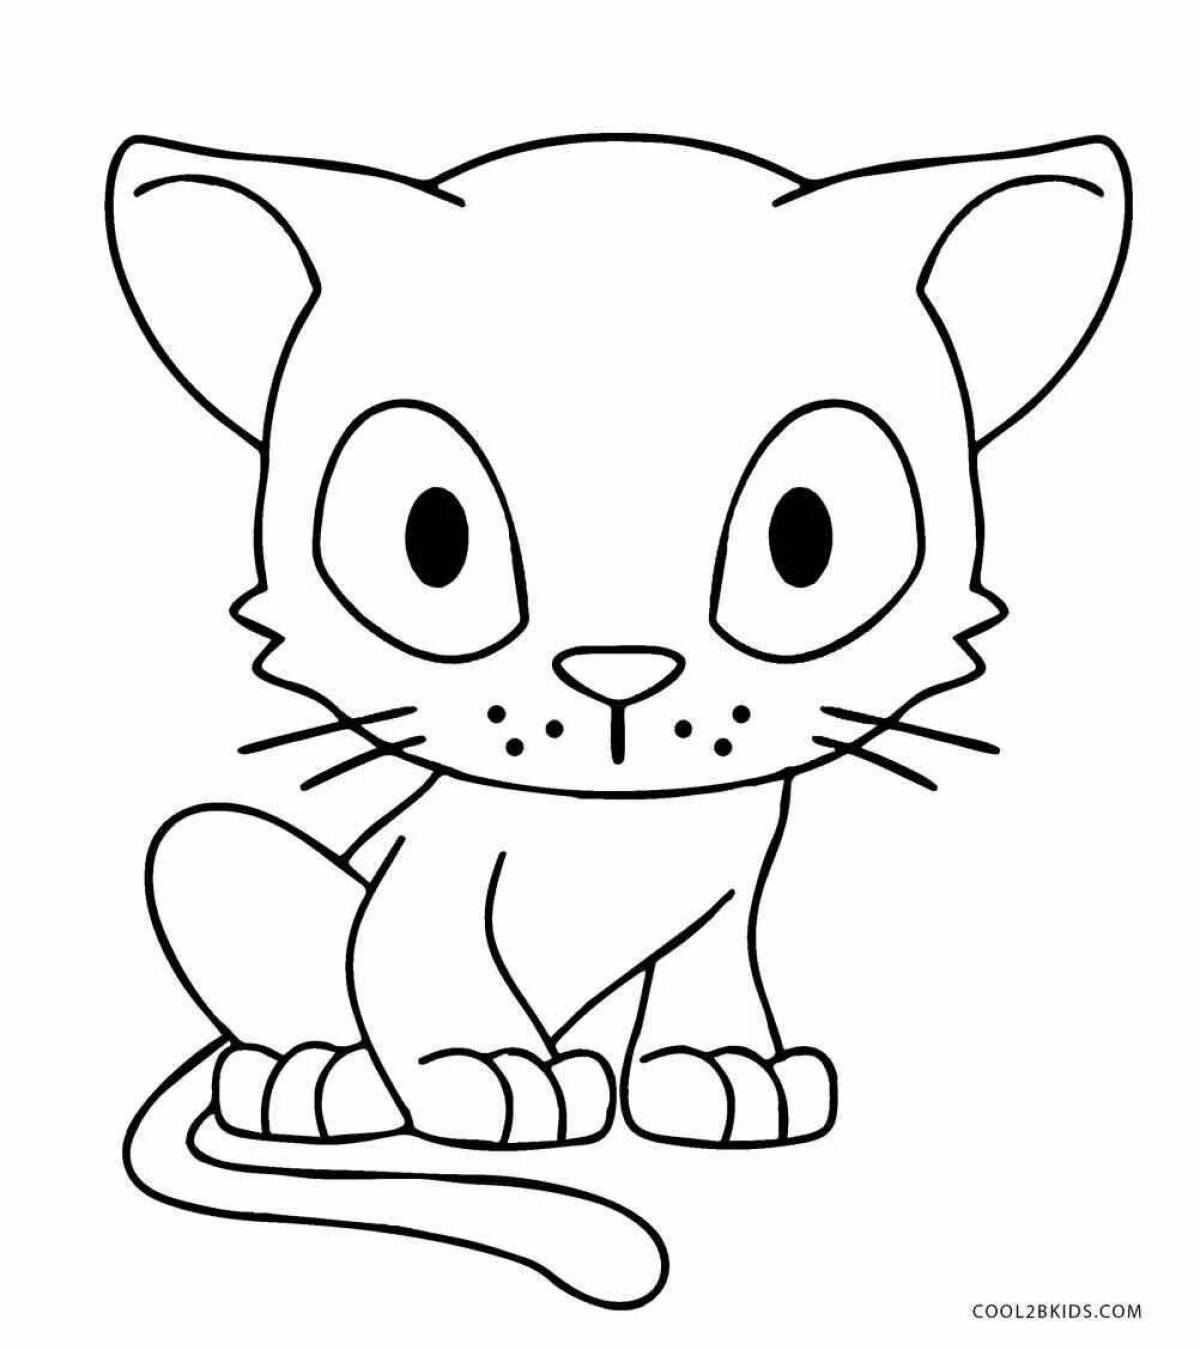 Naughty little kitty coloring page